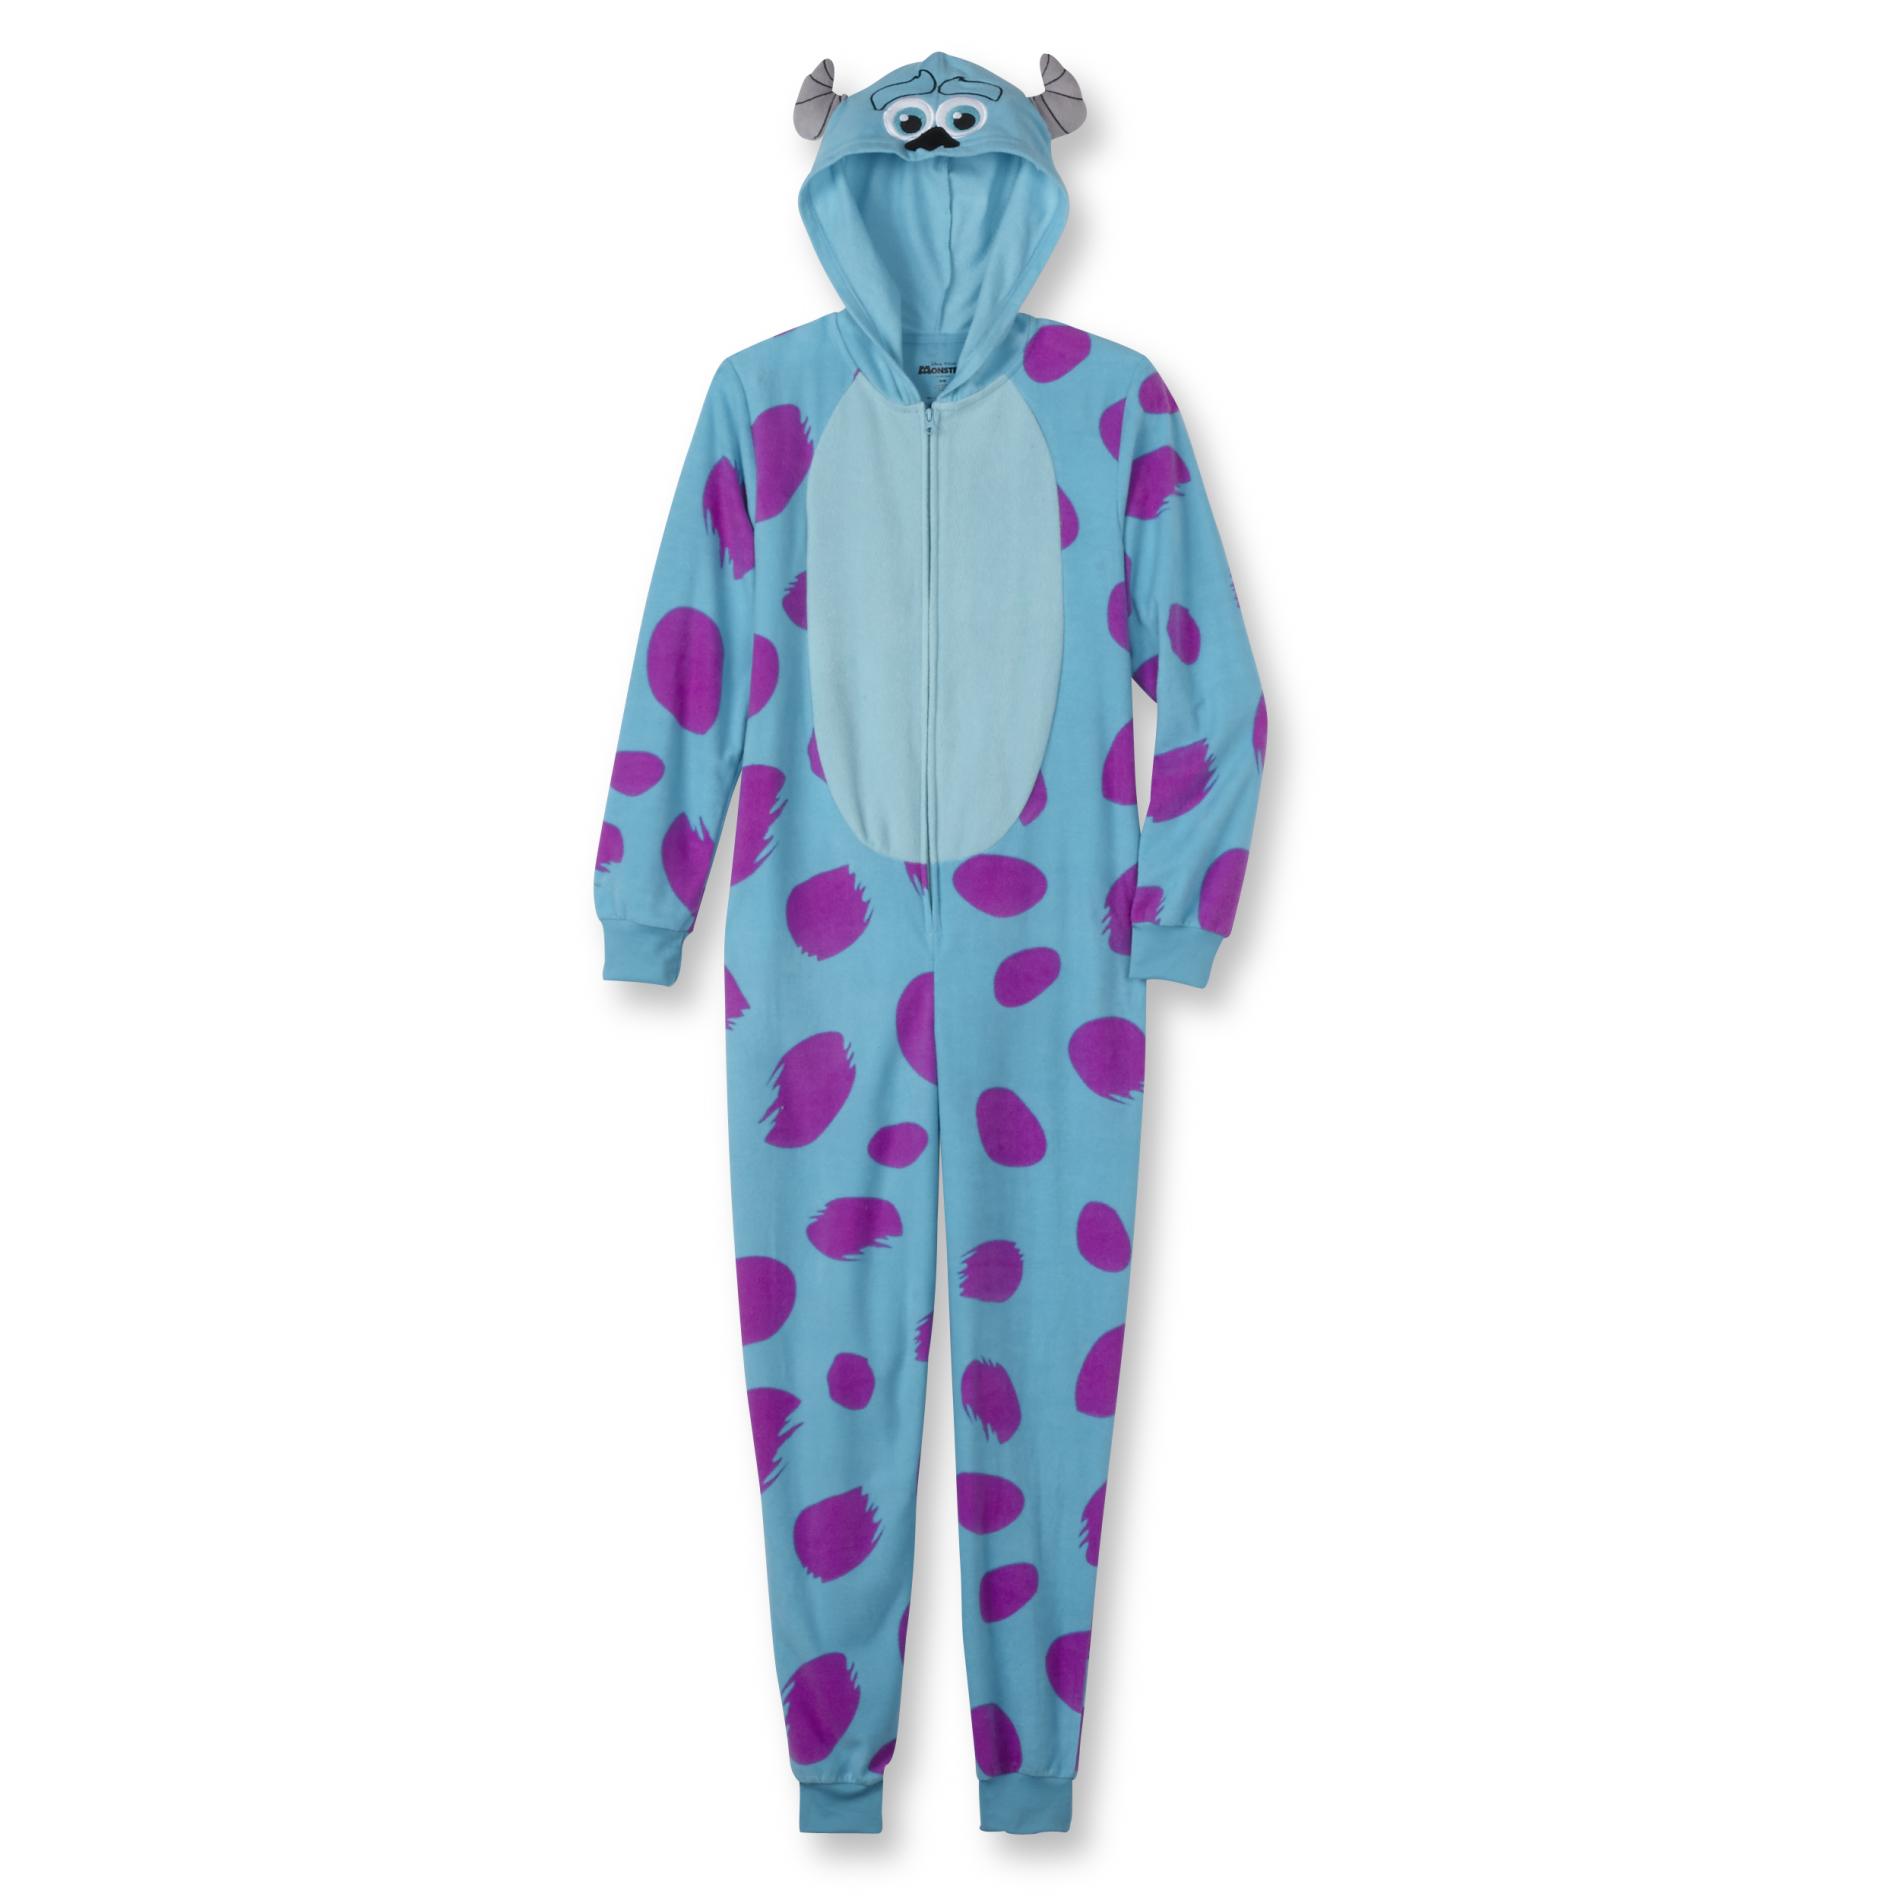 Disney Monsters, Inc. Women's Plus Hooded One-Piece Pajamas - Sulley